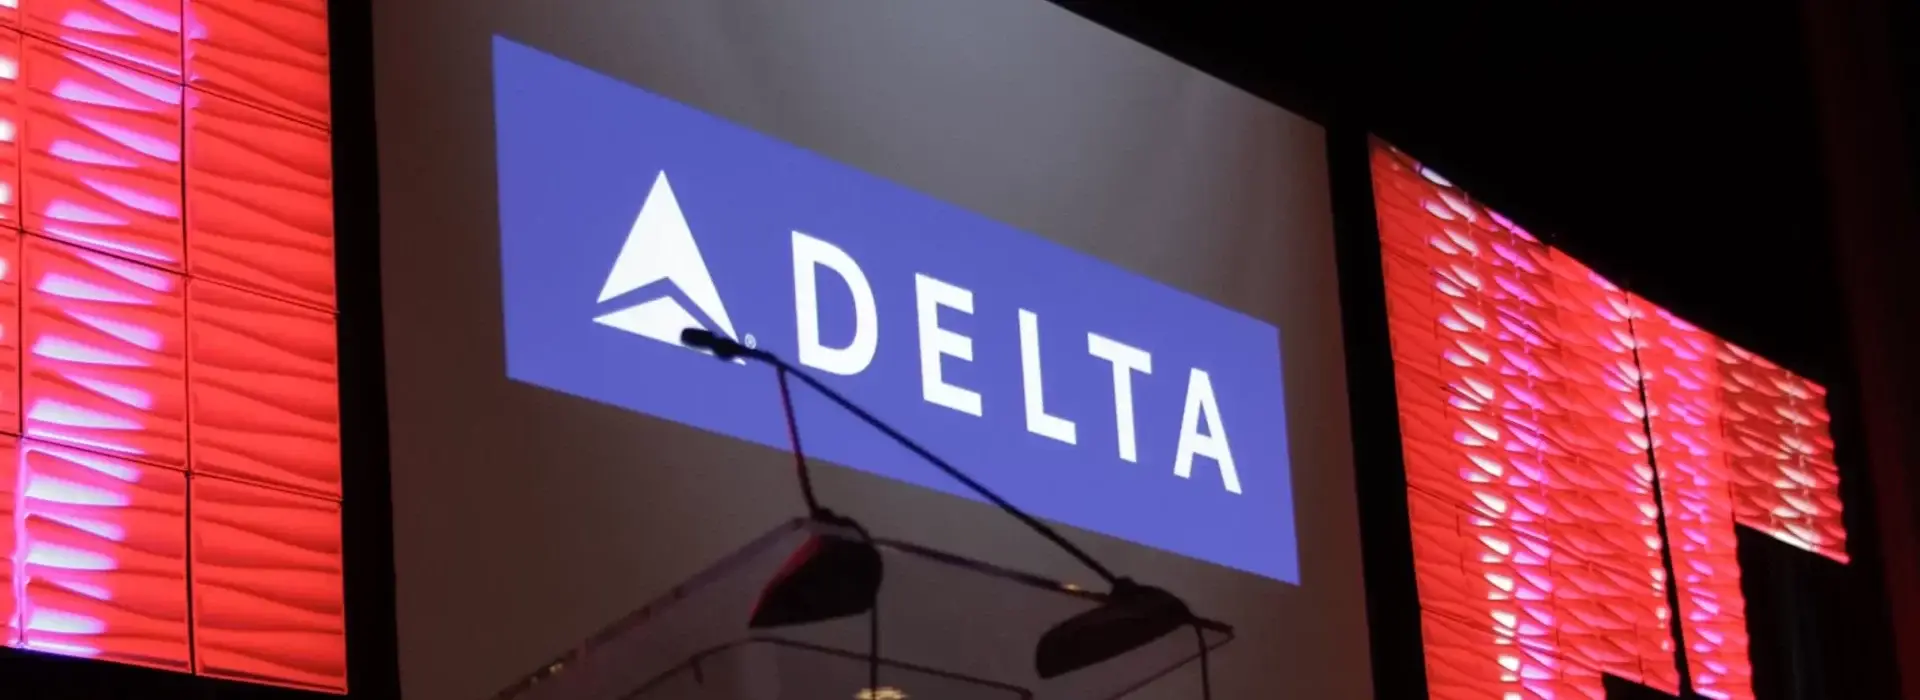 Delta logo on stage at APAV event production